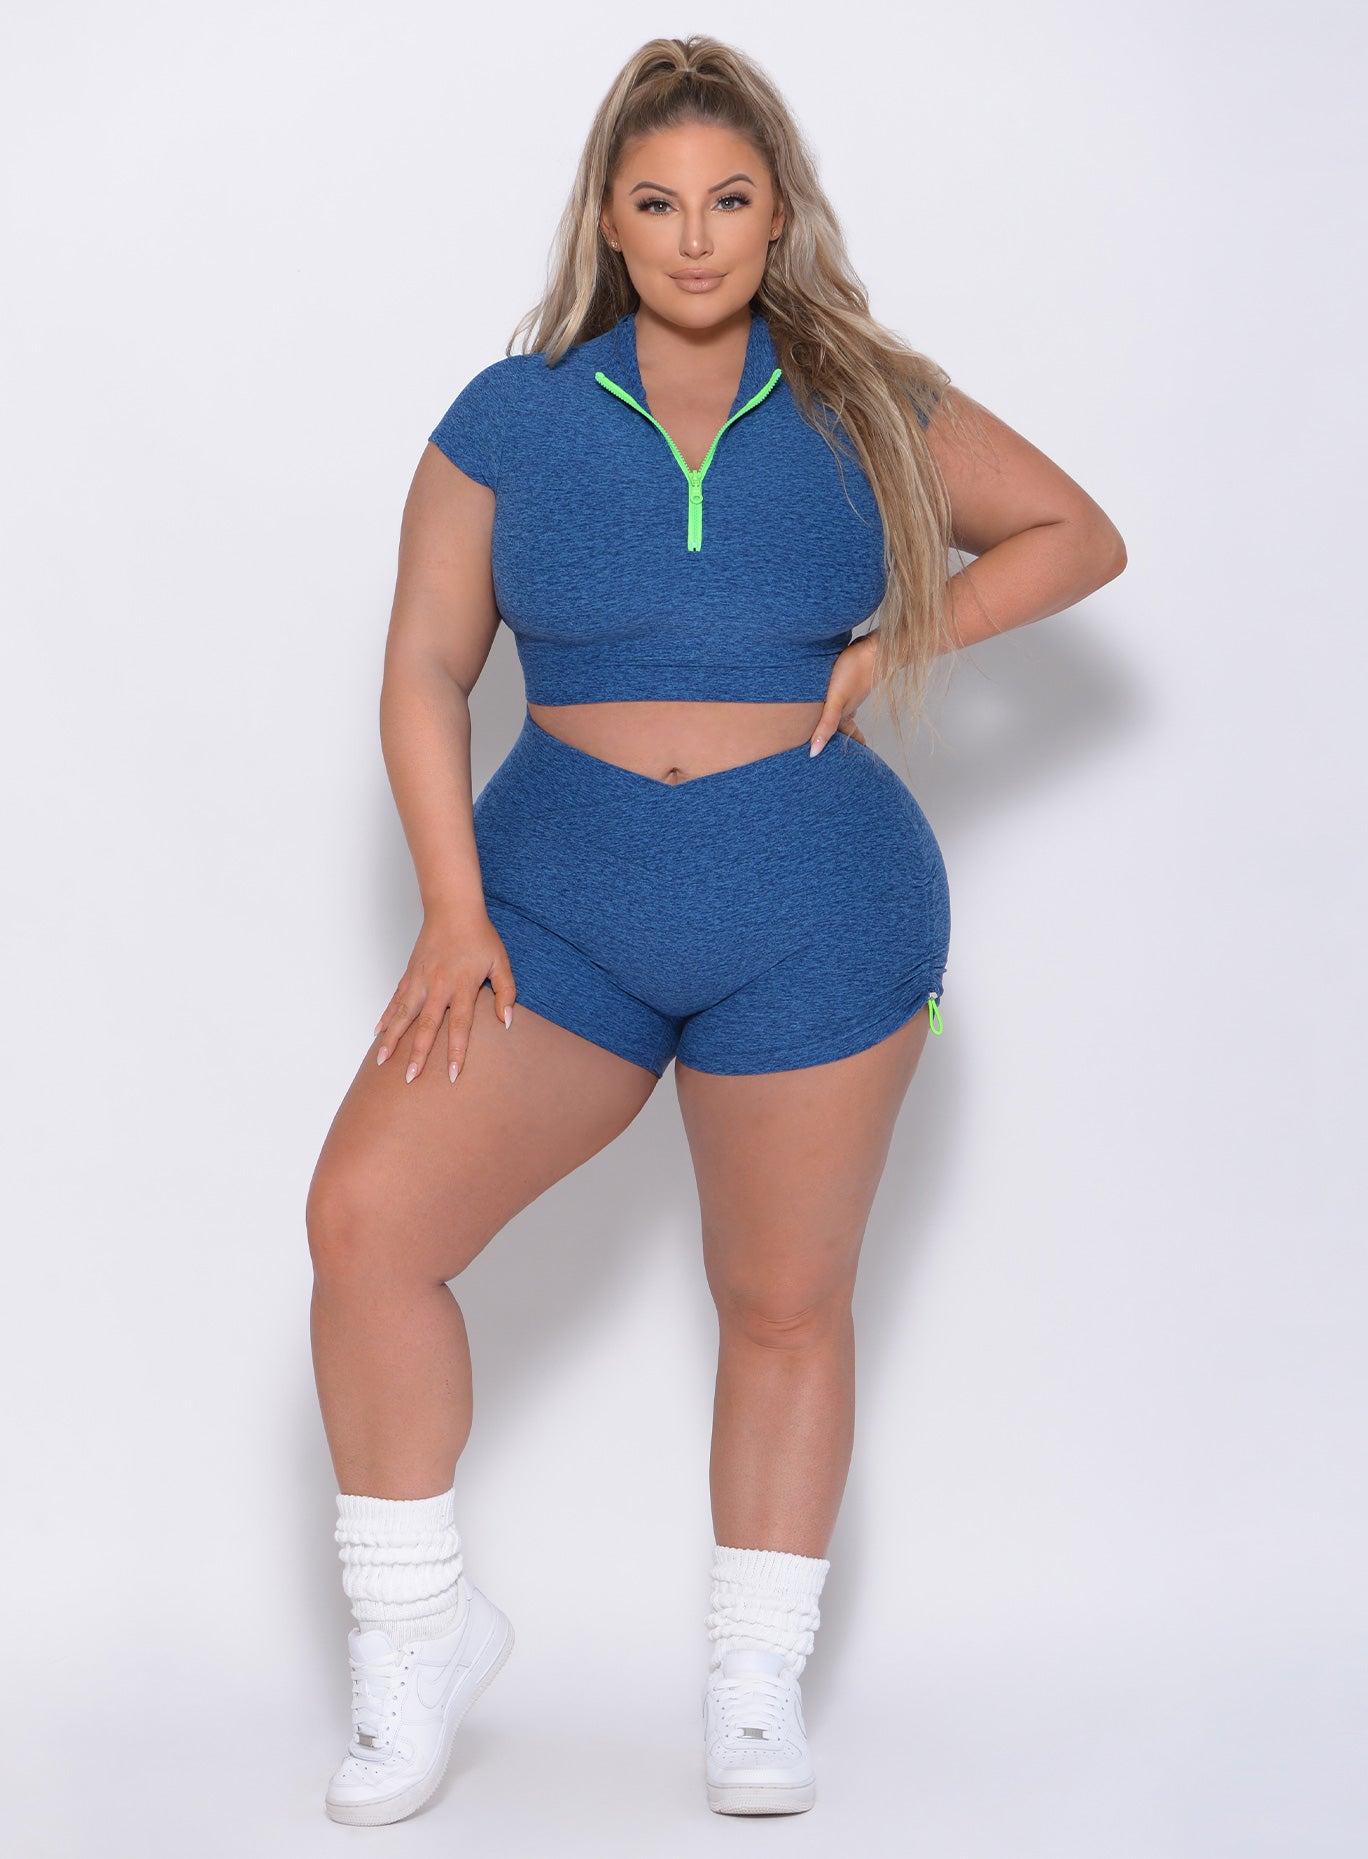 Front view of the model with her left hand on thigh wearing our contour shorts in ocean color and a matching top